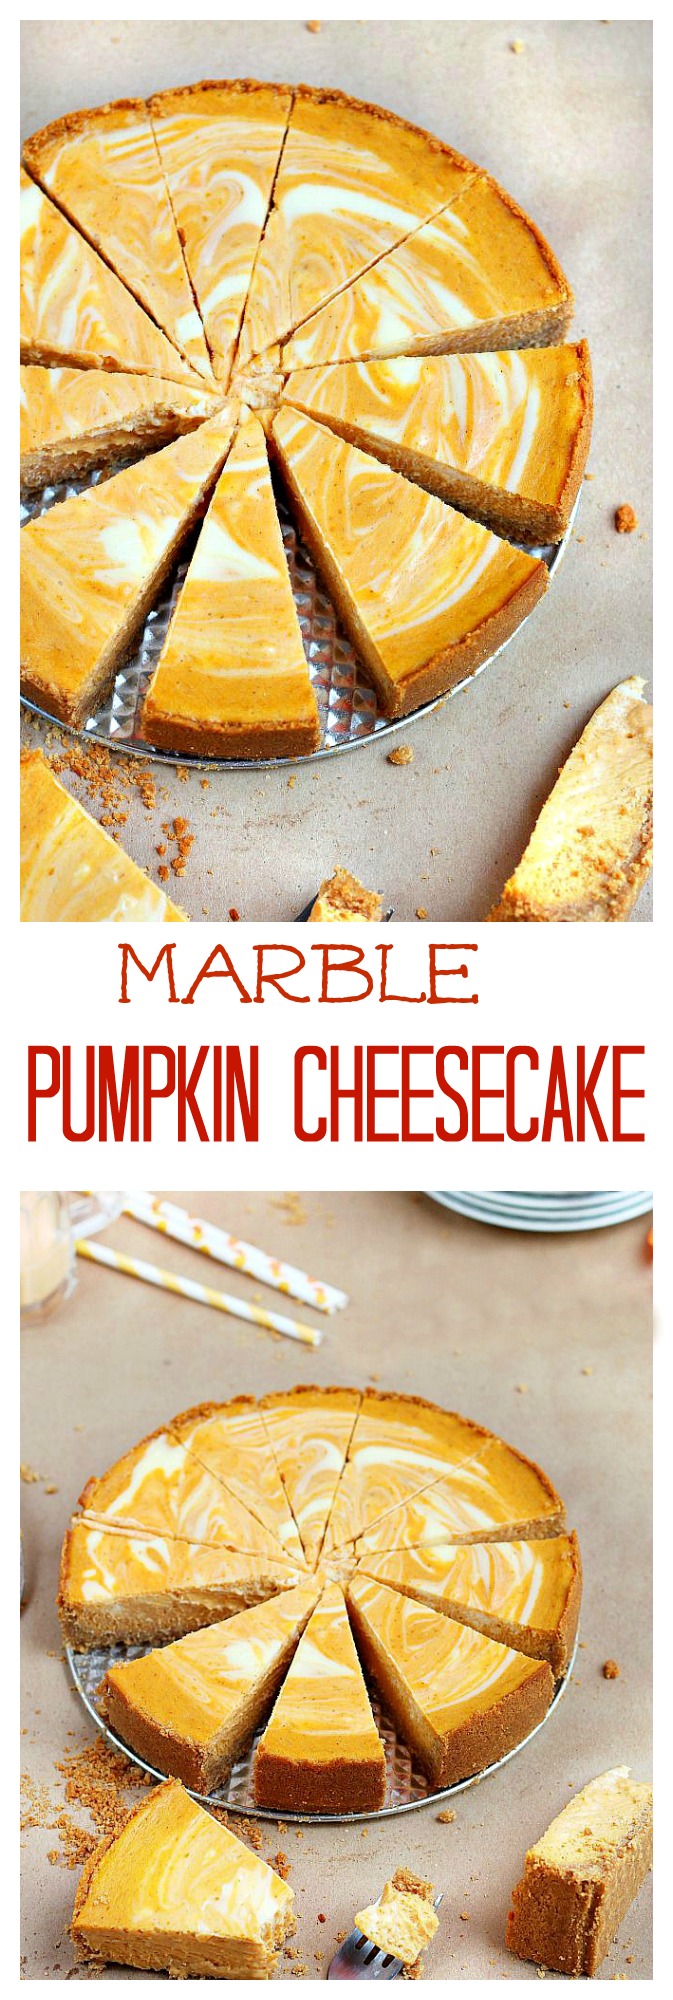 Two fall favorite desserts - pumpkin pie meets velvety cheesecake in this scrumptious marble pumpkin cheesecake. The perfect dessert for your Thanksgiving dinner party.